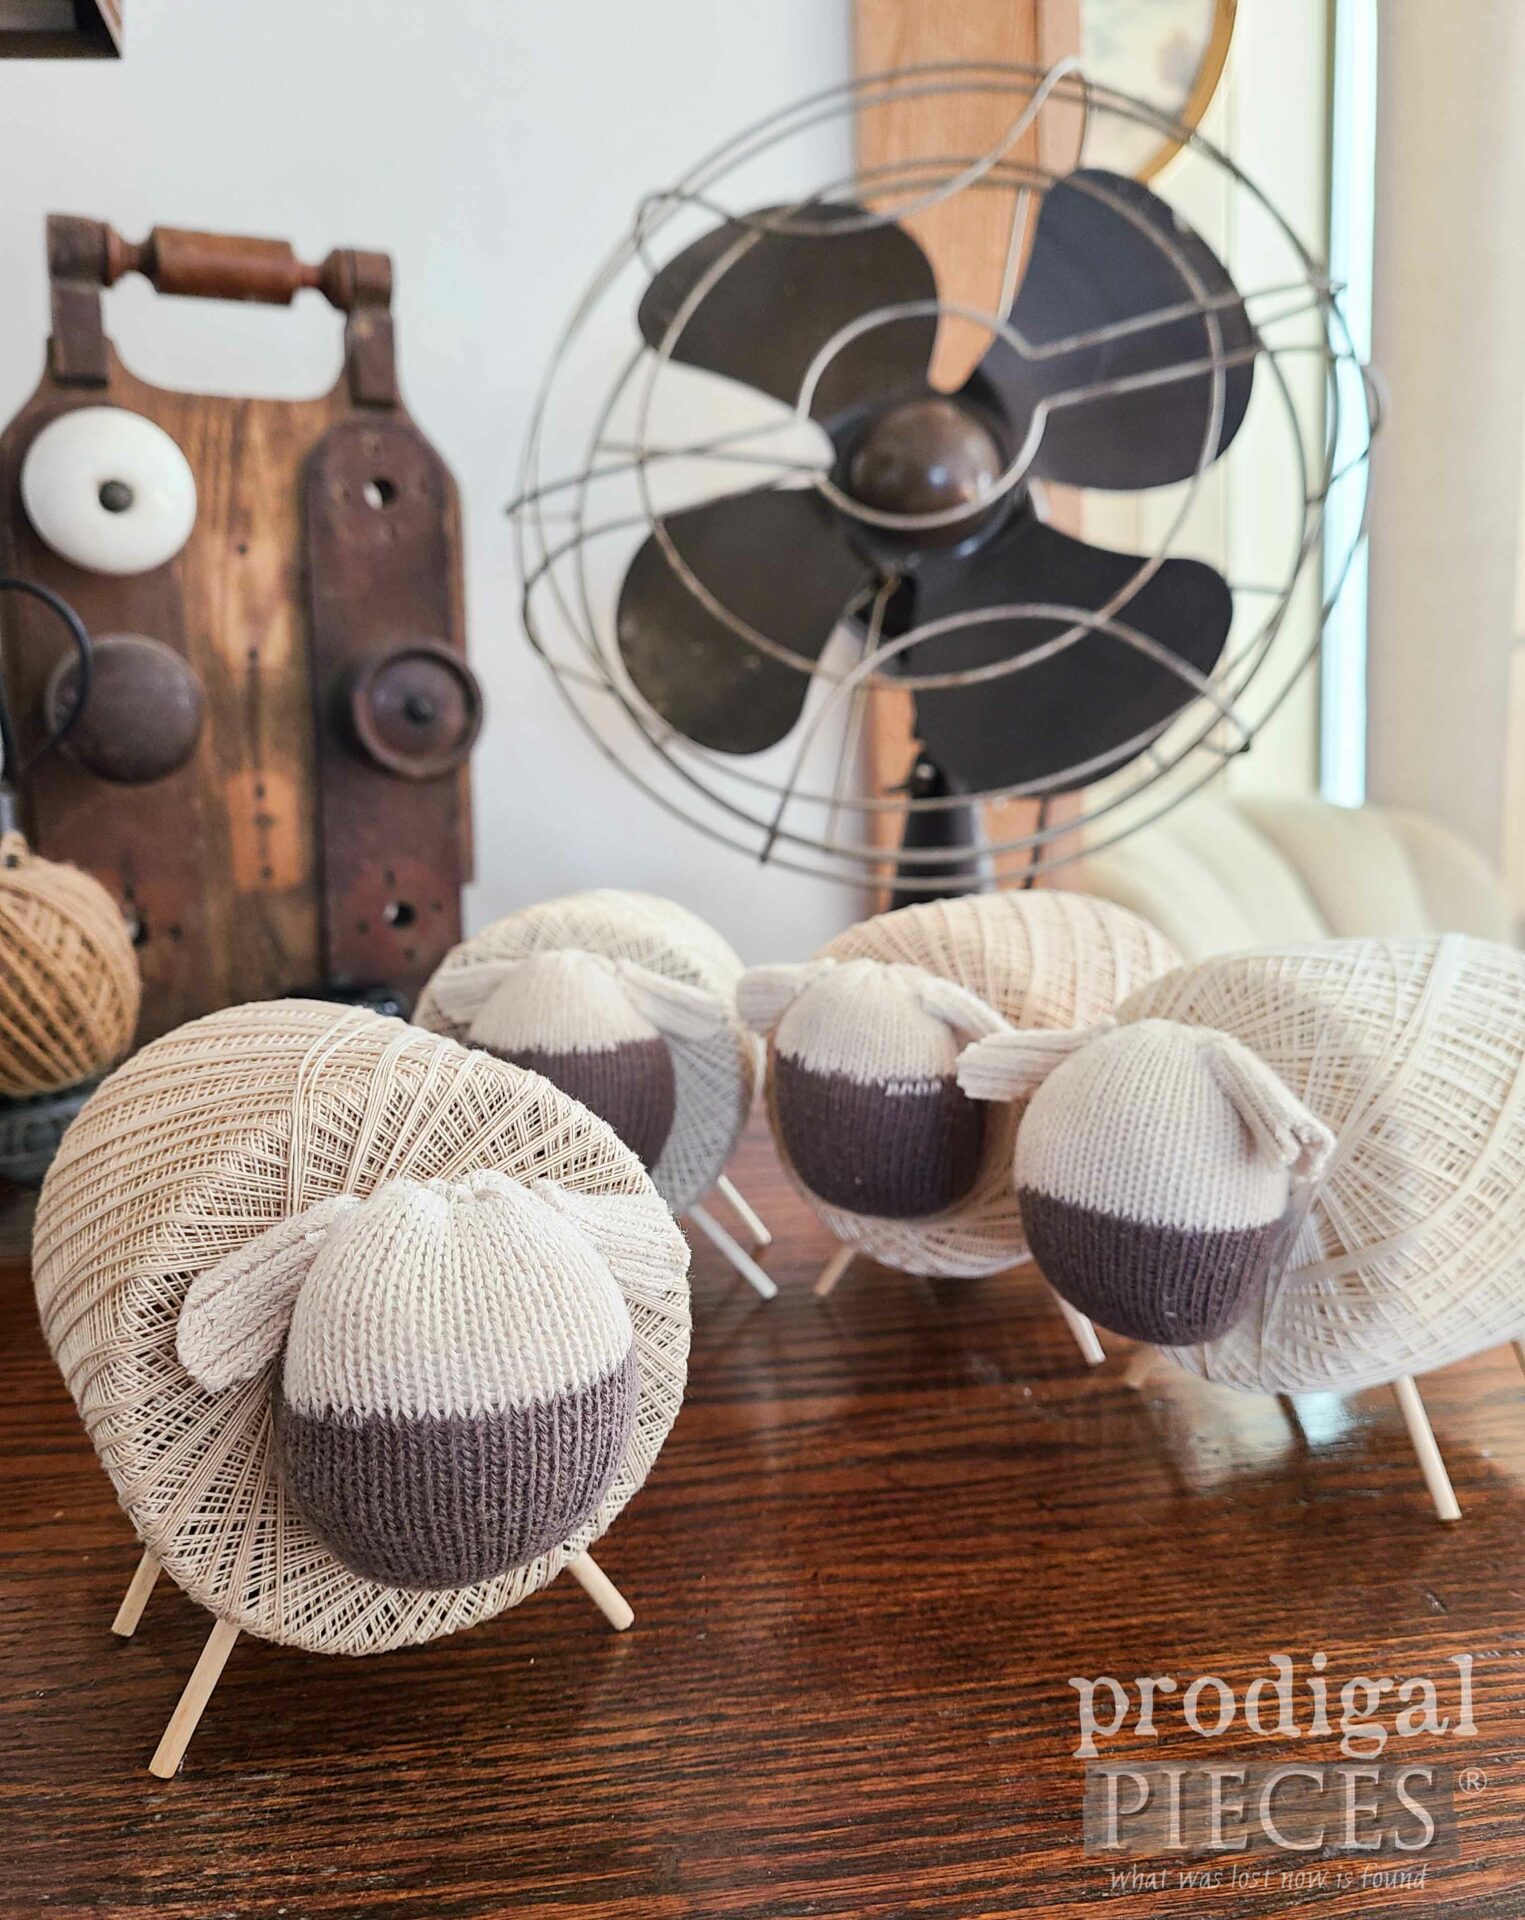 Adorable Upcycled Sheep for DIY Spool Sheep by Larissa of Prodigal Pieces | prodigalpieces.com #prodigalpieces